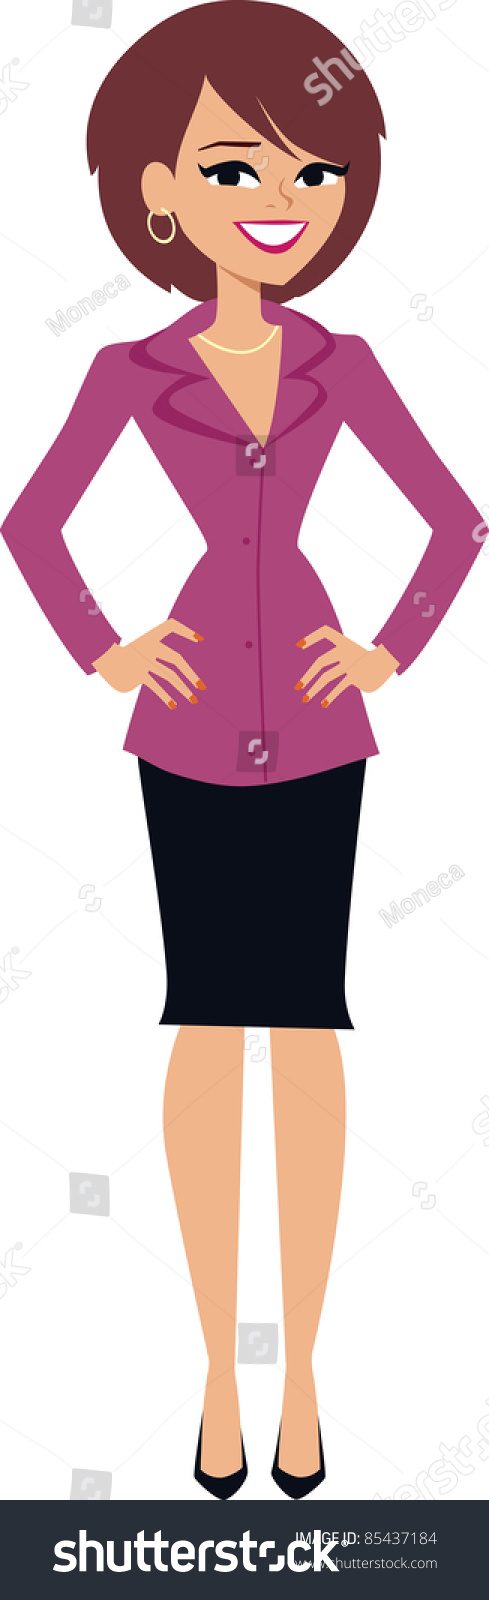 clipart young lady - photo #12